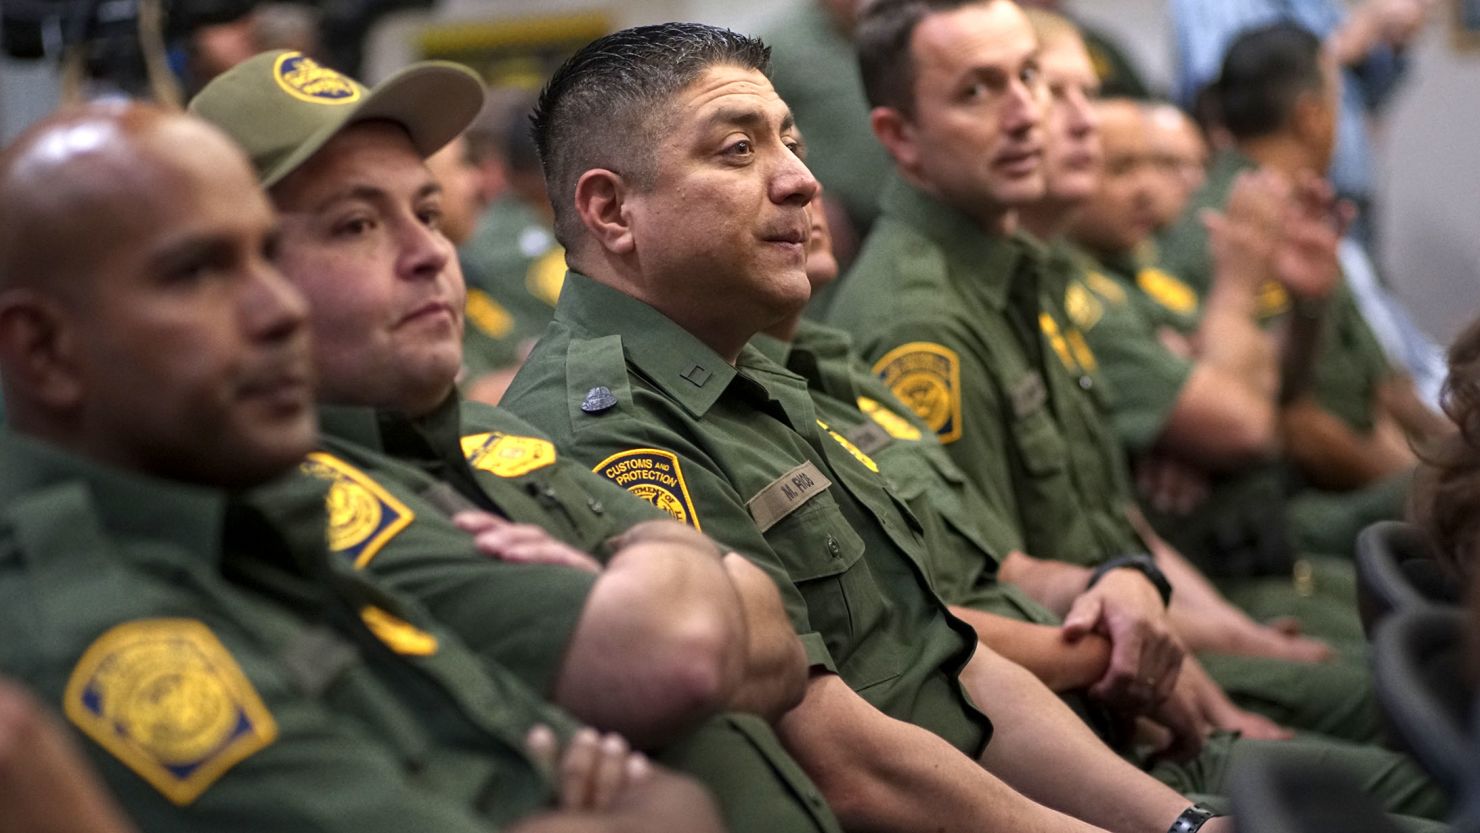 Border Patrol agents listened to Homeland Security Secretary Kirstjen Nielsen in California last month. Nielsen is among officials claiming the border is highly dangerous for agents.